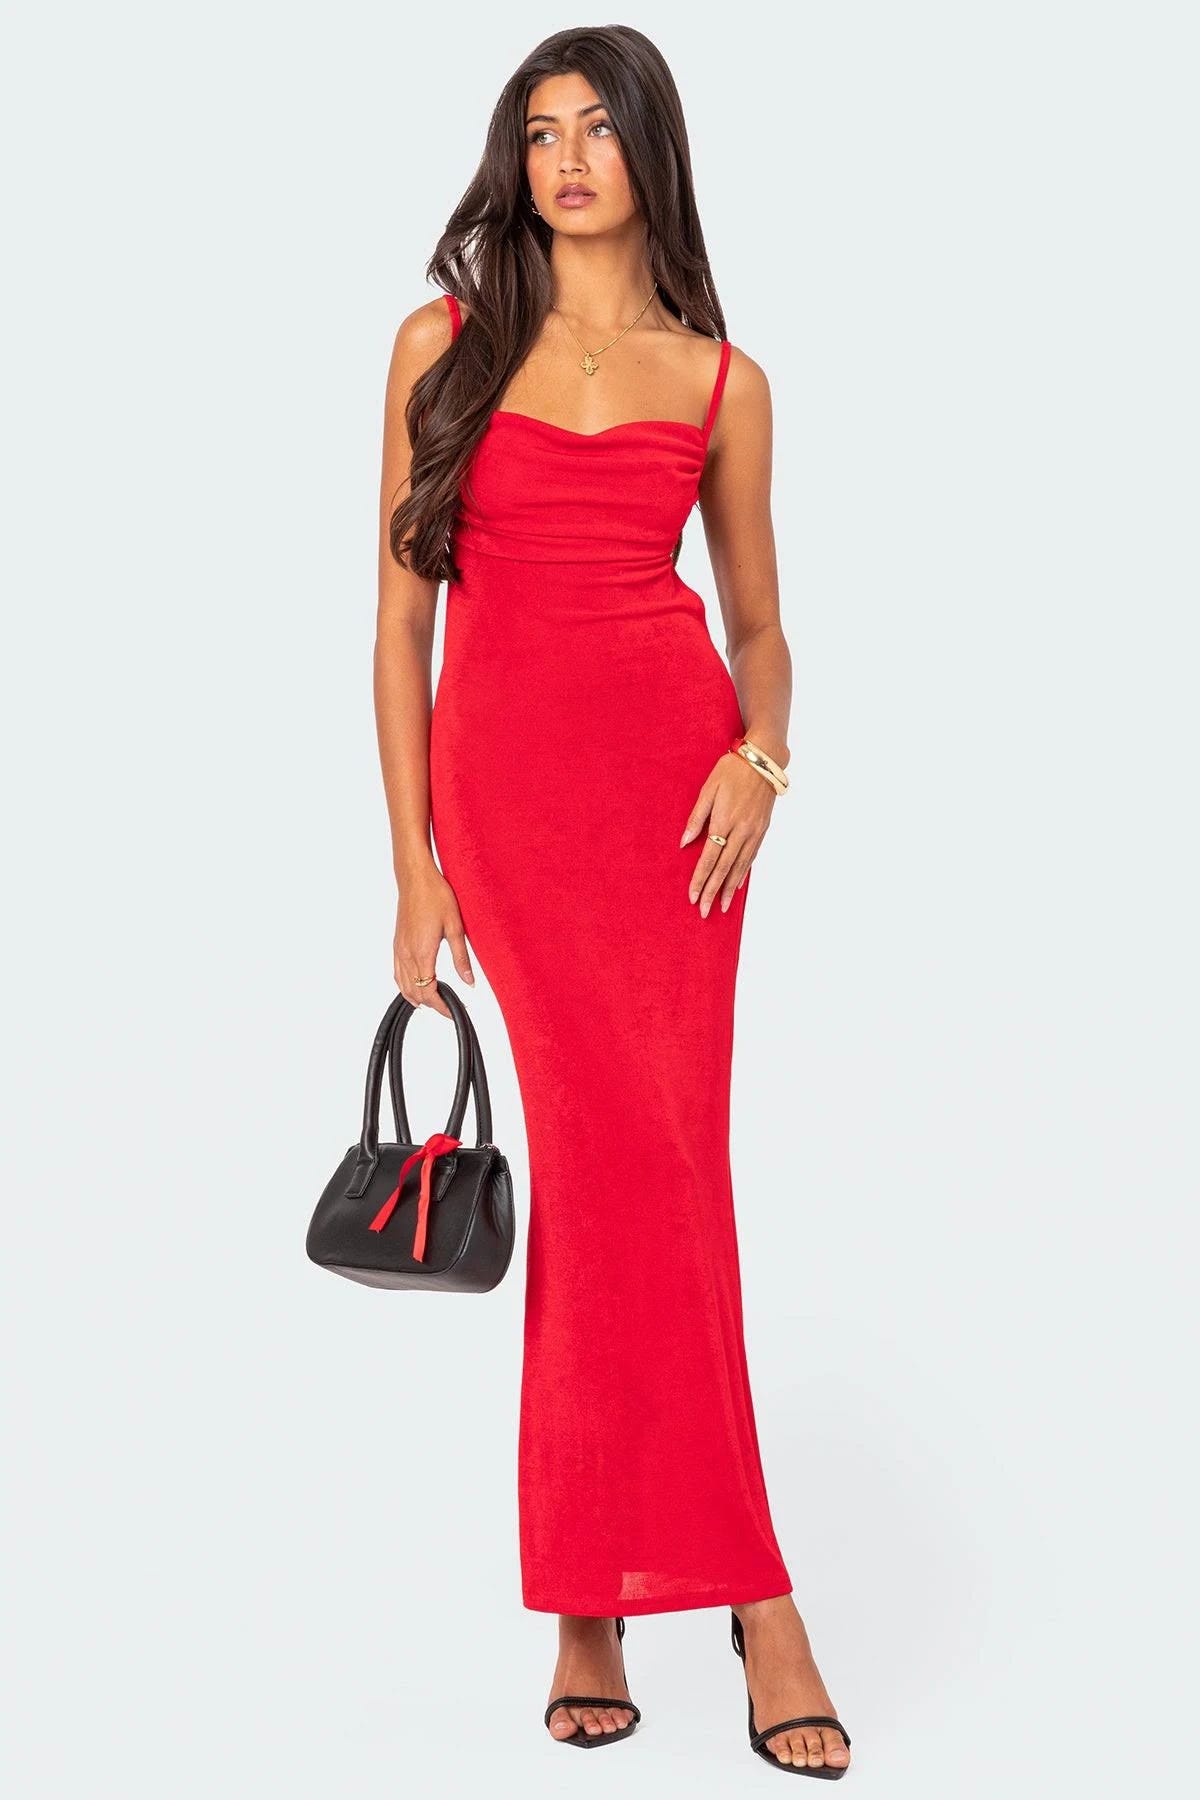 Sexy Red Maxi Dress with Open Back Design - Unique | Image